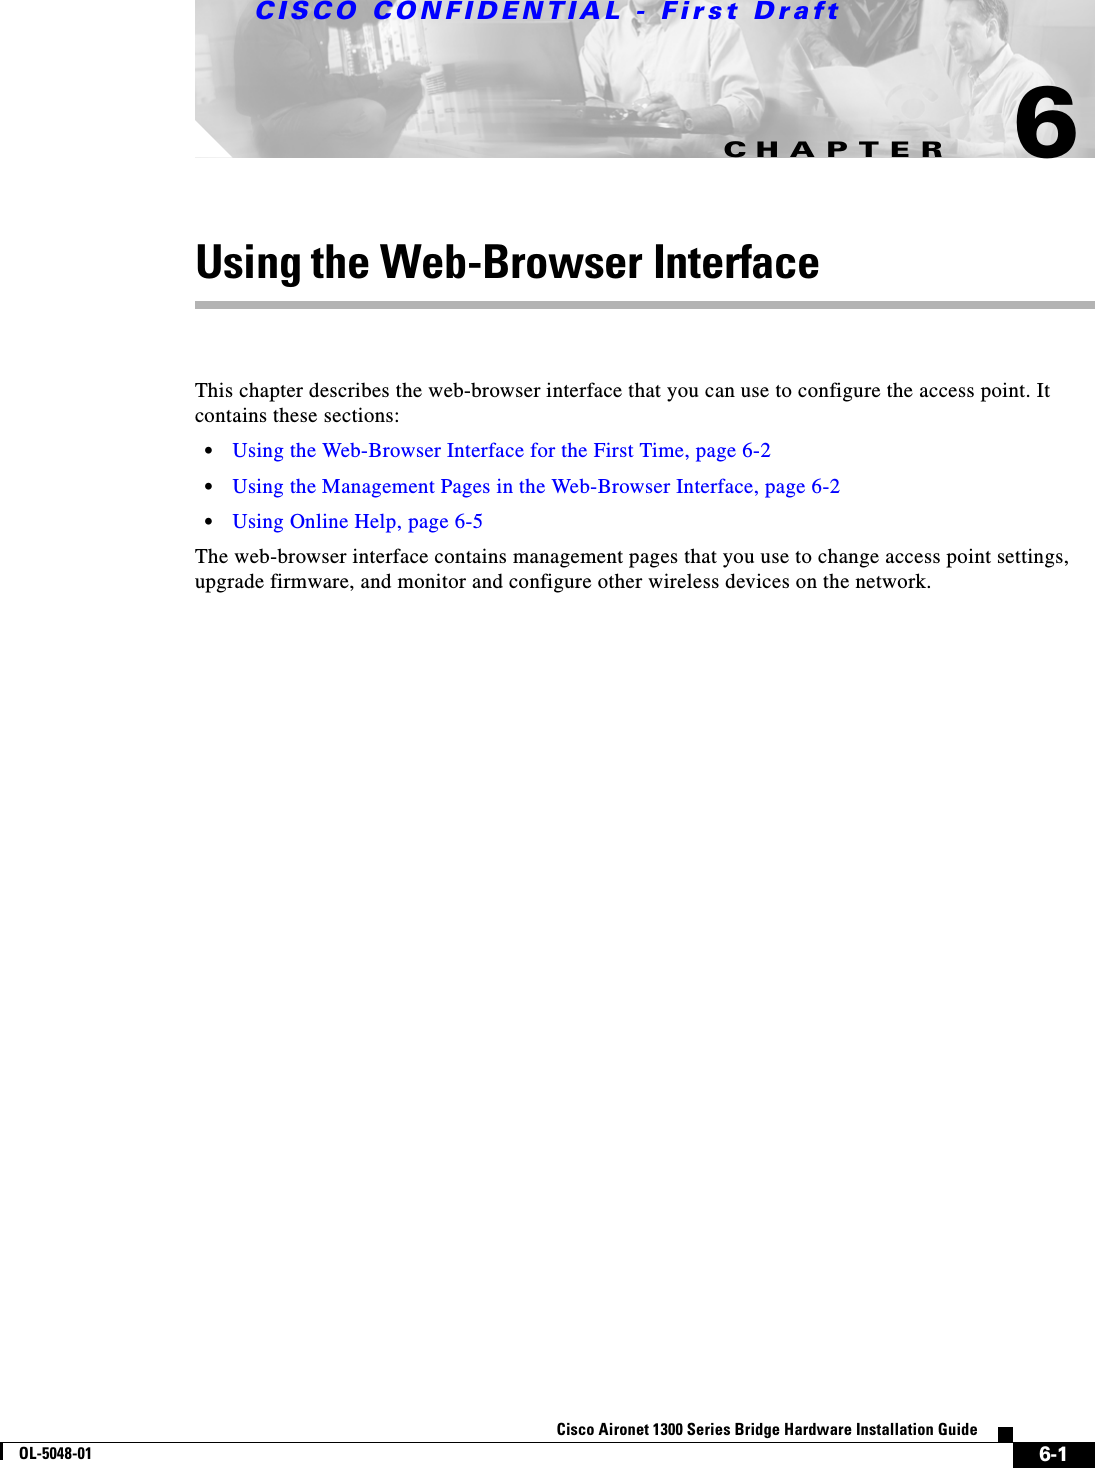 CHAPTERCISCO CONFIDENTIAL - First Draft6-1Cisco Aironet 1300 Series Bridge Hardware Installation GuideOL-5048-016Using the Web-Browser InterfaceThis chapter describes the web-browser interface that you can use to configure the access point. It contains these sections:•Using the Web-Browser Interface for the First Time, page 6-2•Using the Management Pages in the Web-Browser Interface, page 6-2•Using Online Help, page 6-5The web-browser interface contains management pages that you use to change access point settings, upgrade firmware, and monitor and configure other wireless devices on the network.